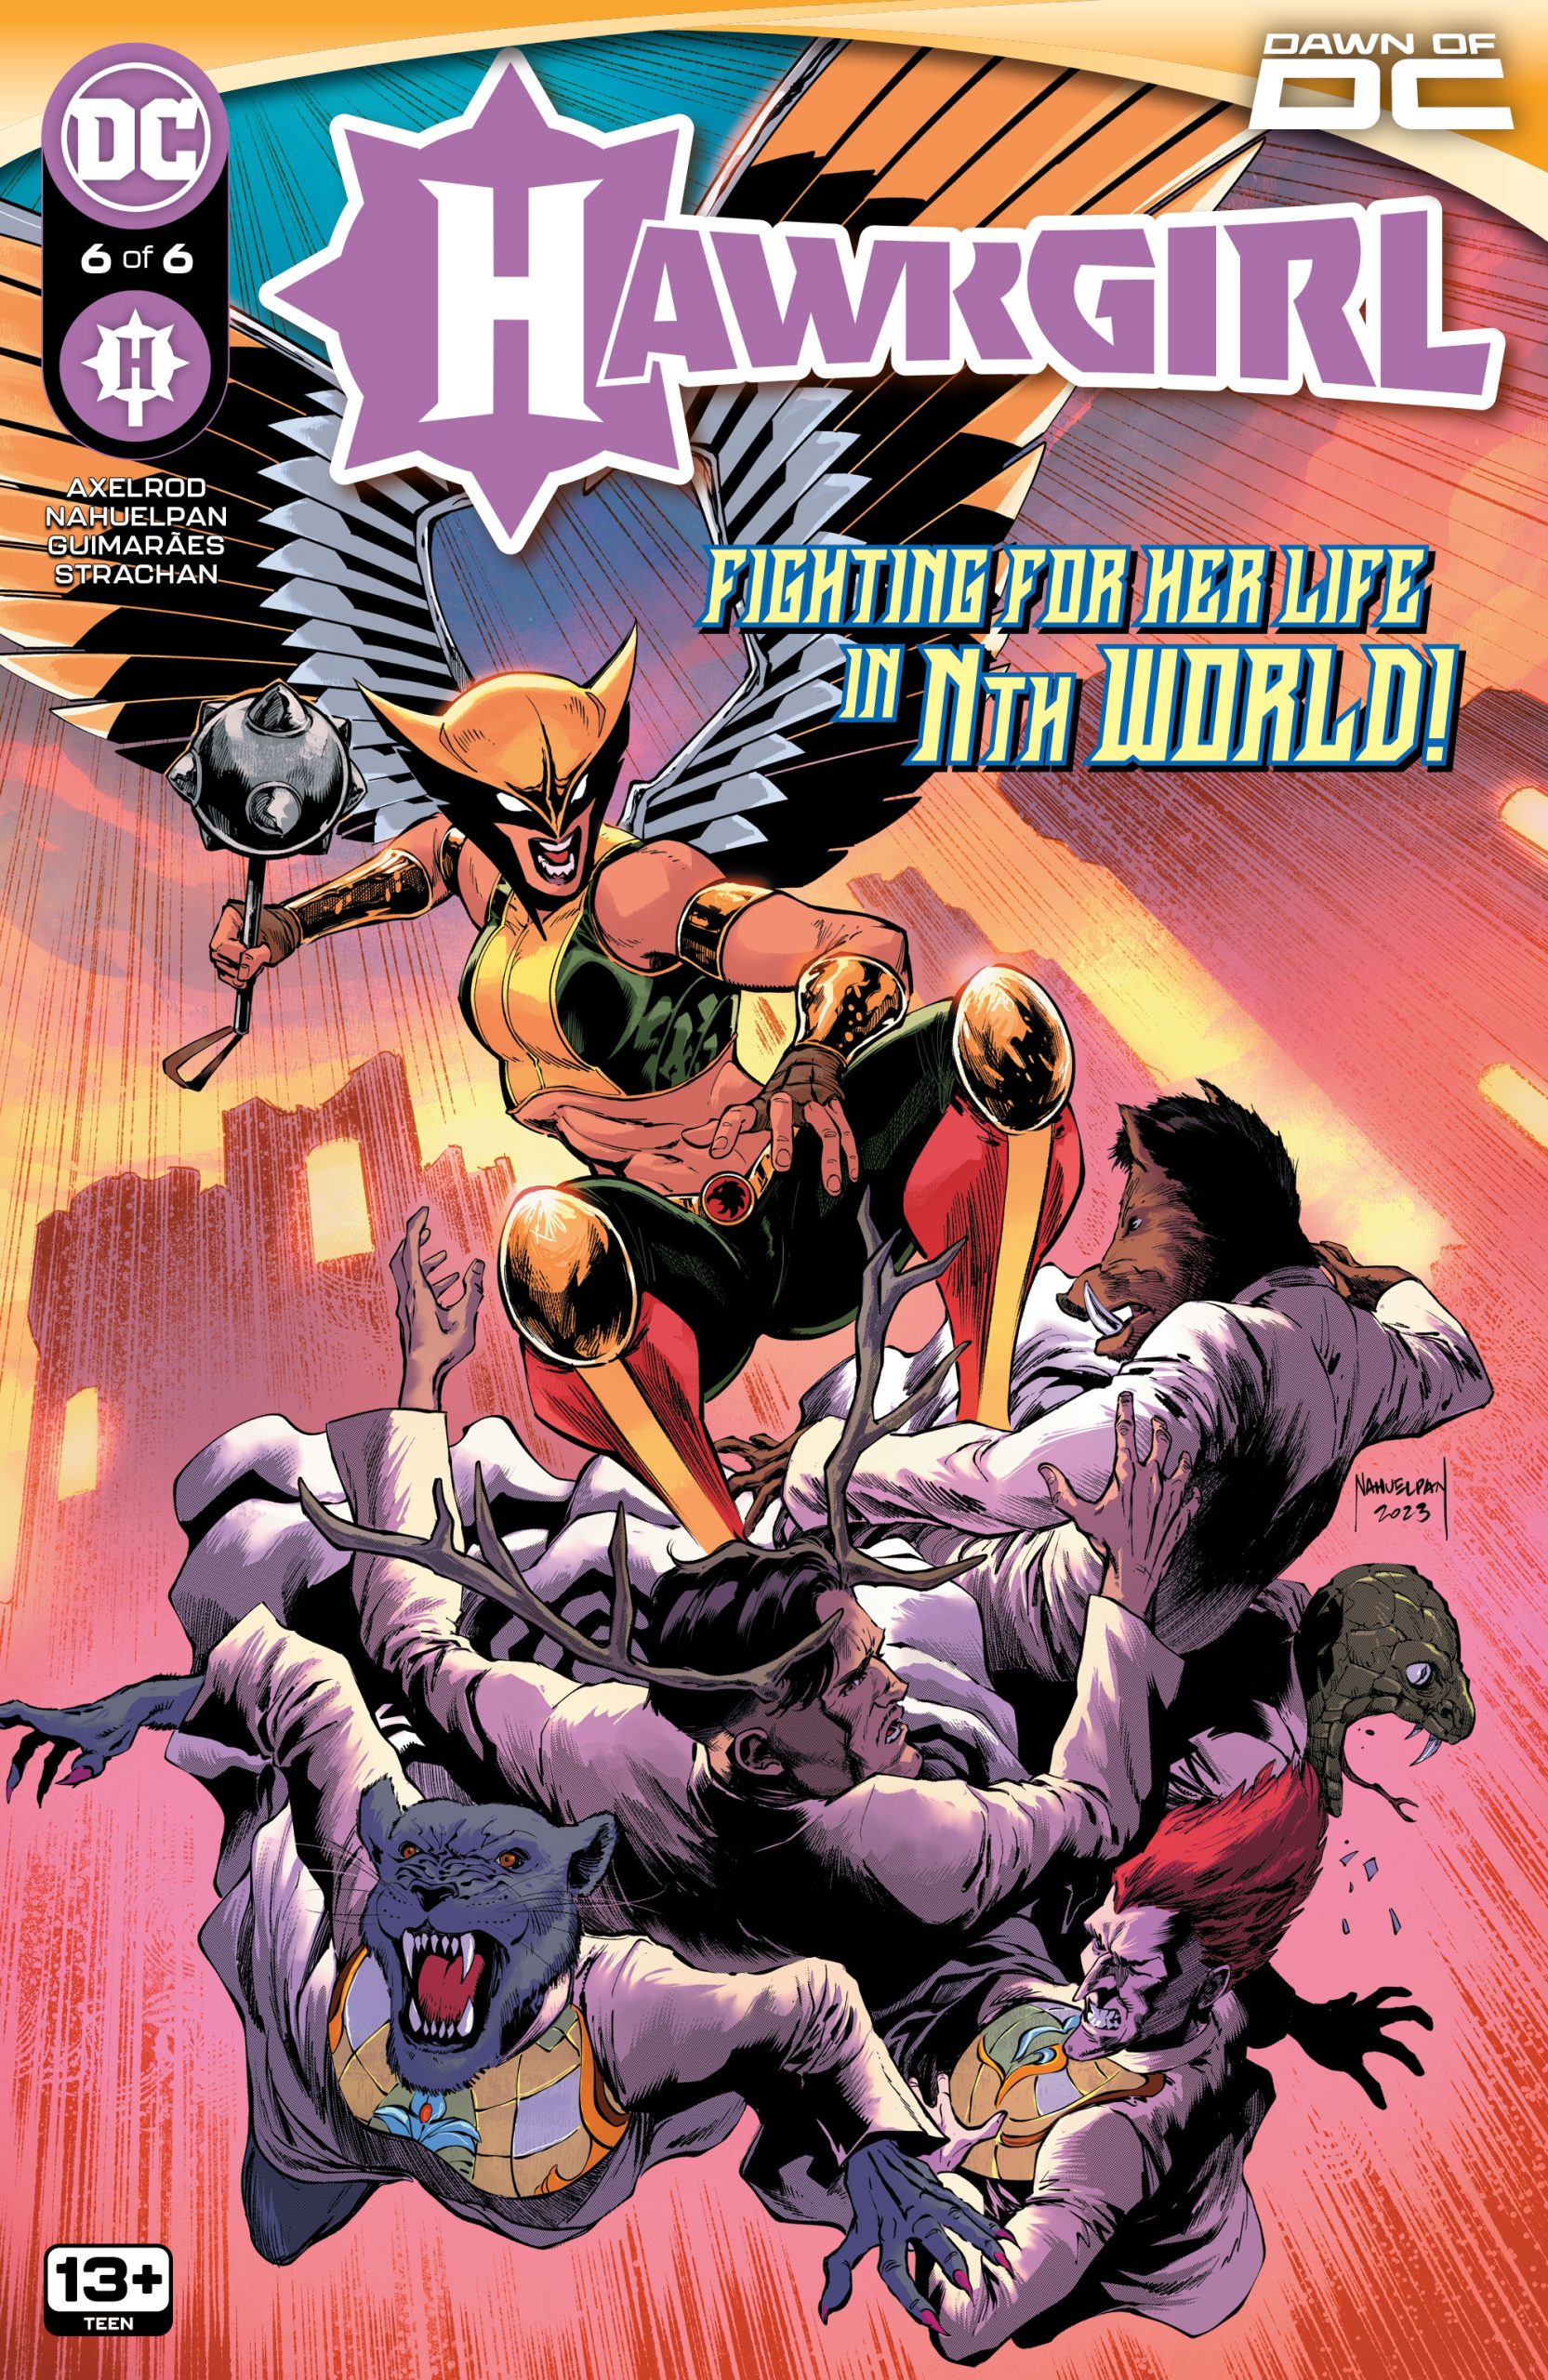 DC Preview: Hawkgirl #6